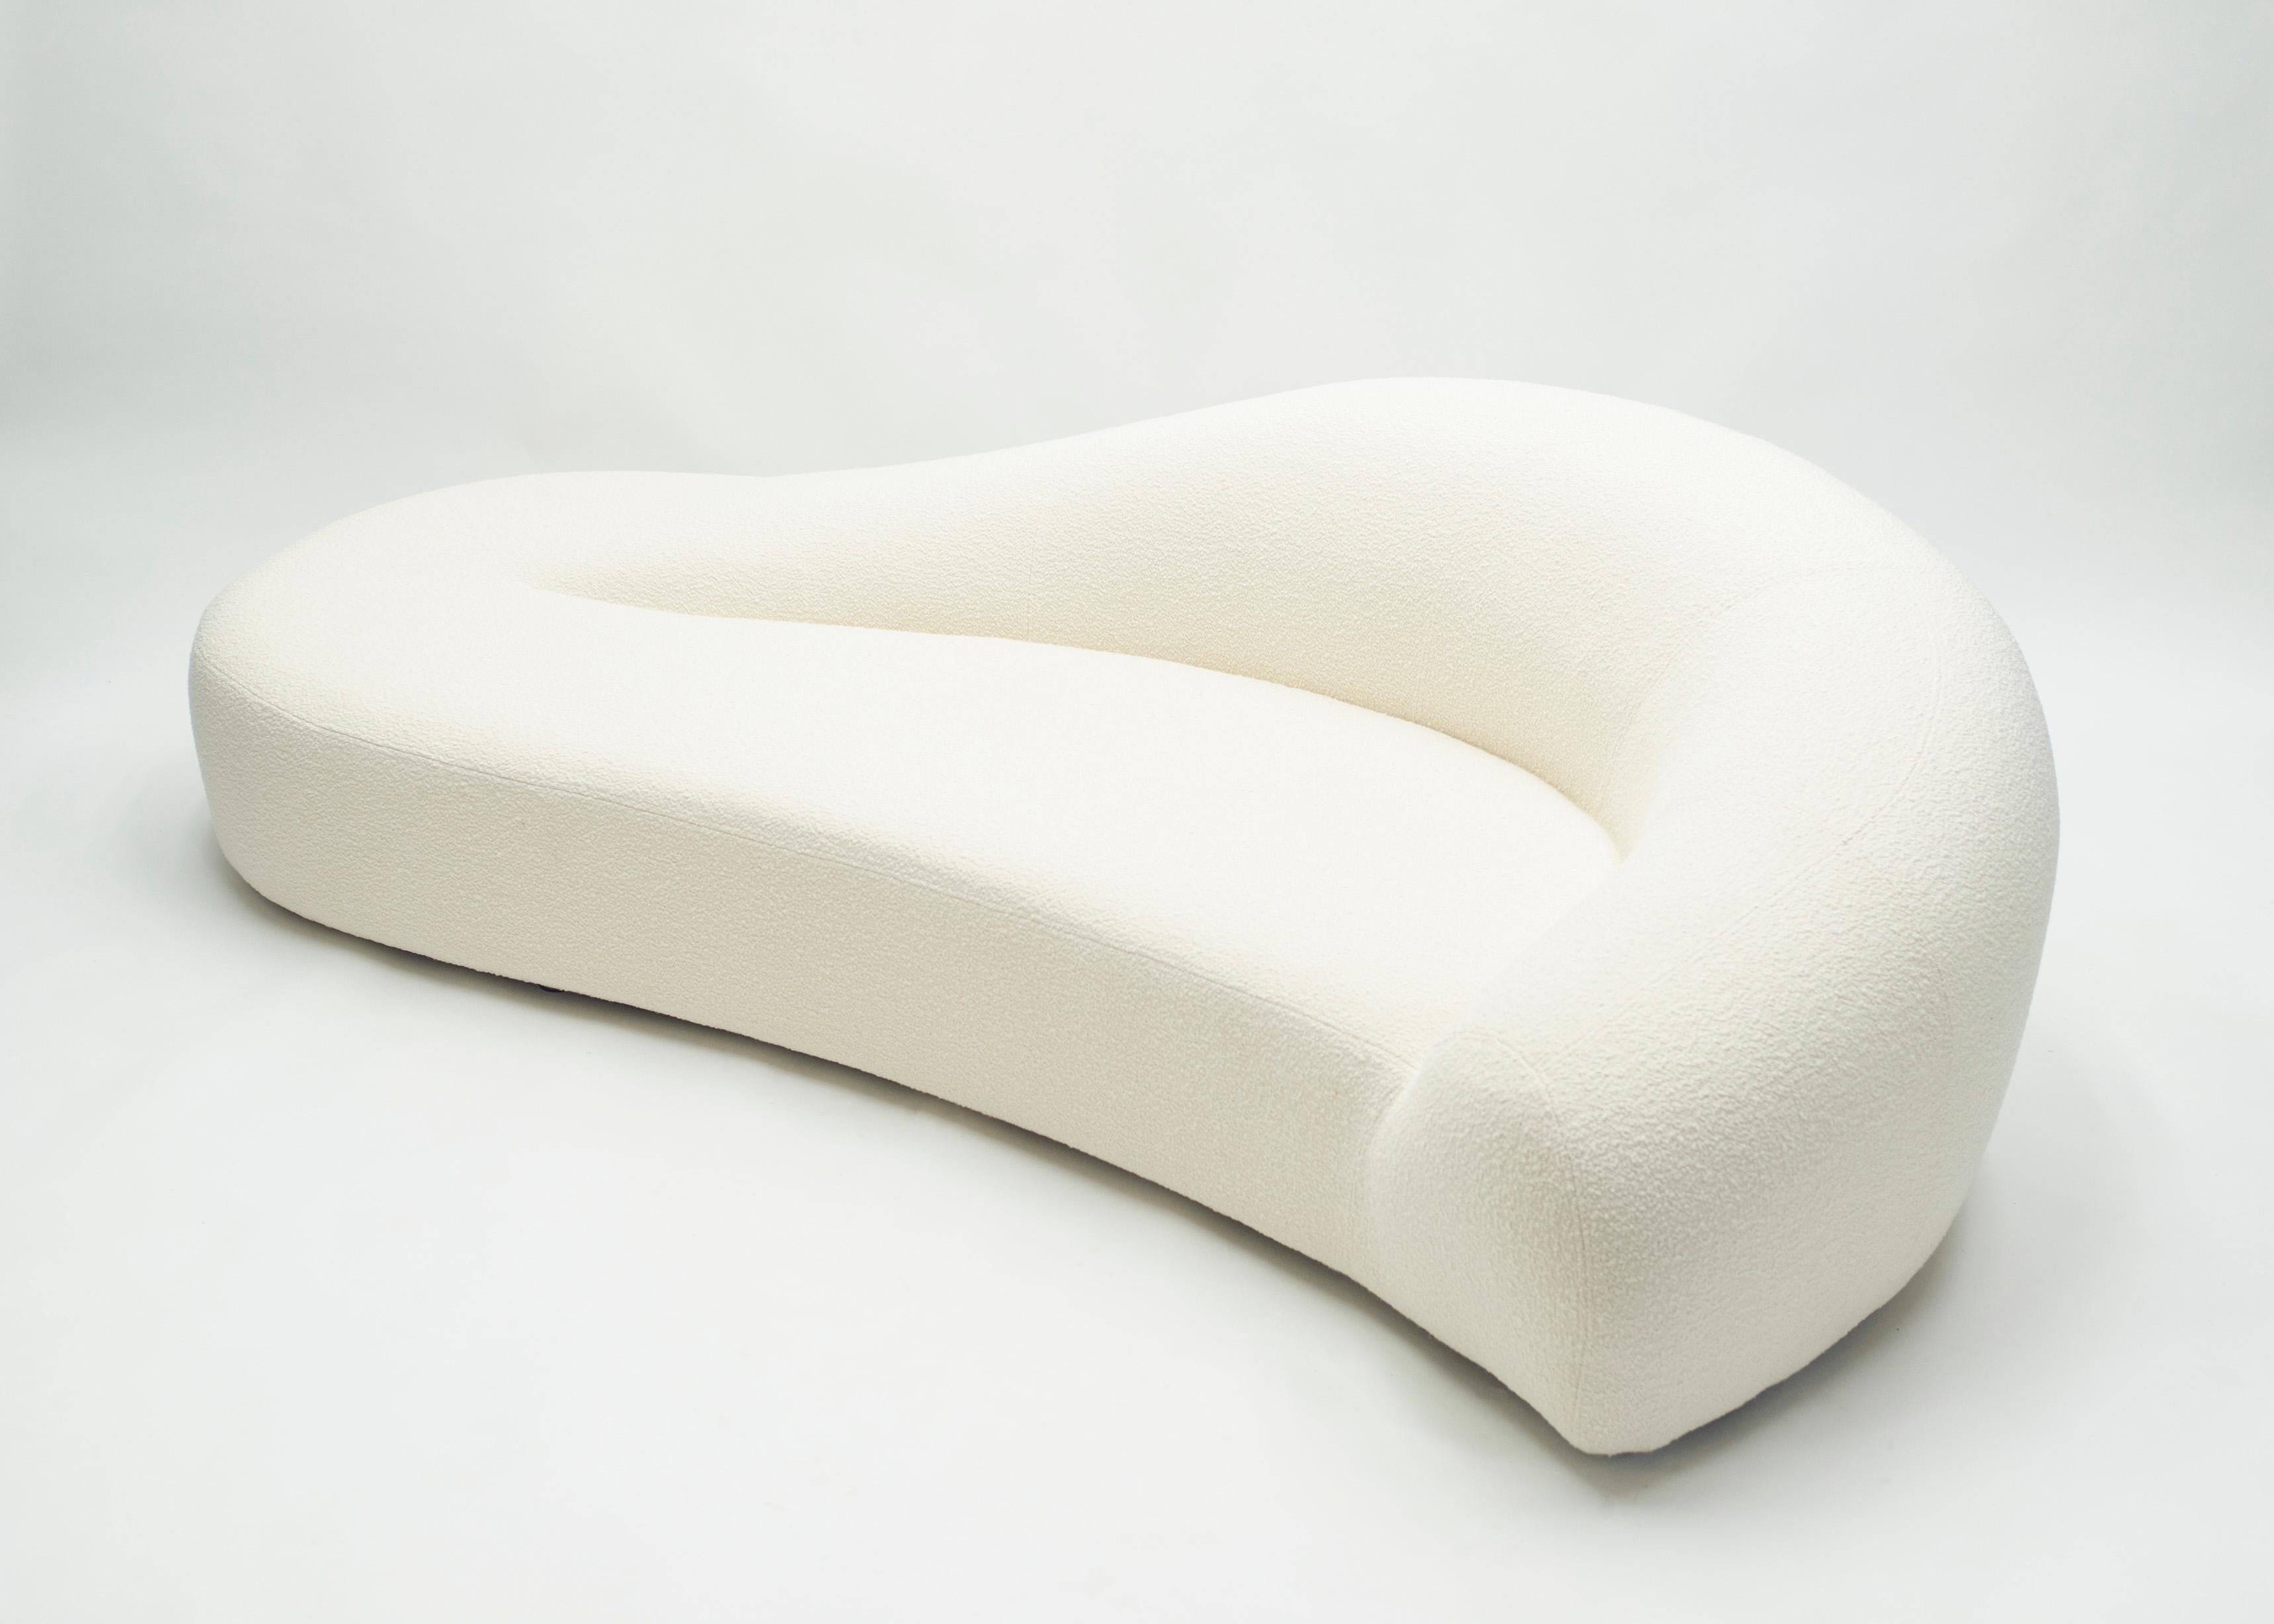 Very rare and unique large sofa by Raphaël Raffel for Maison Honoré Paris in the mid-1970s. This sofa has been newly upholstered in luxurious white cream virgin wool bouclettes fabric from French editor Lelievre - Lama Reference for a soft yet